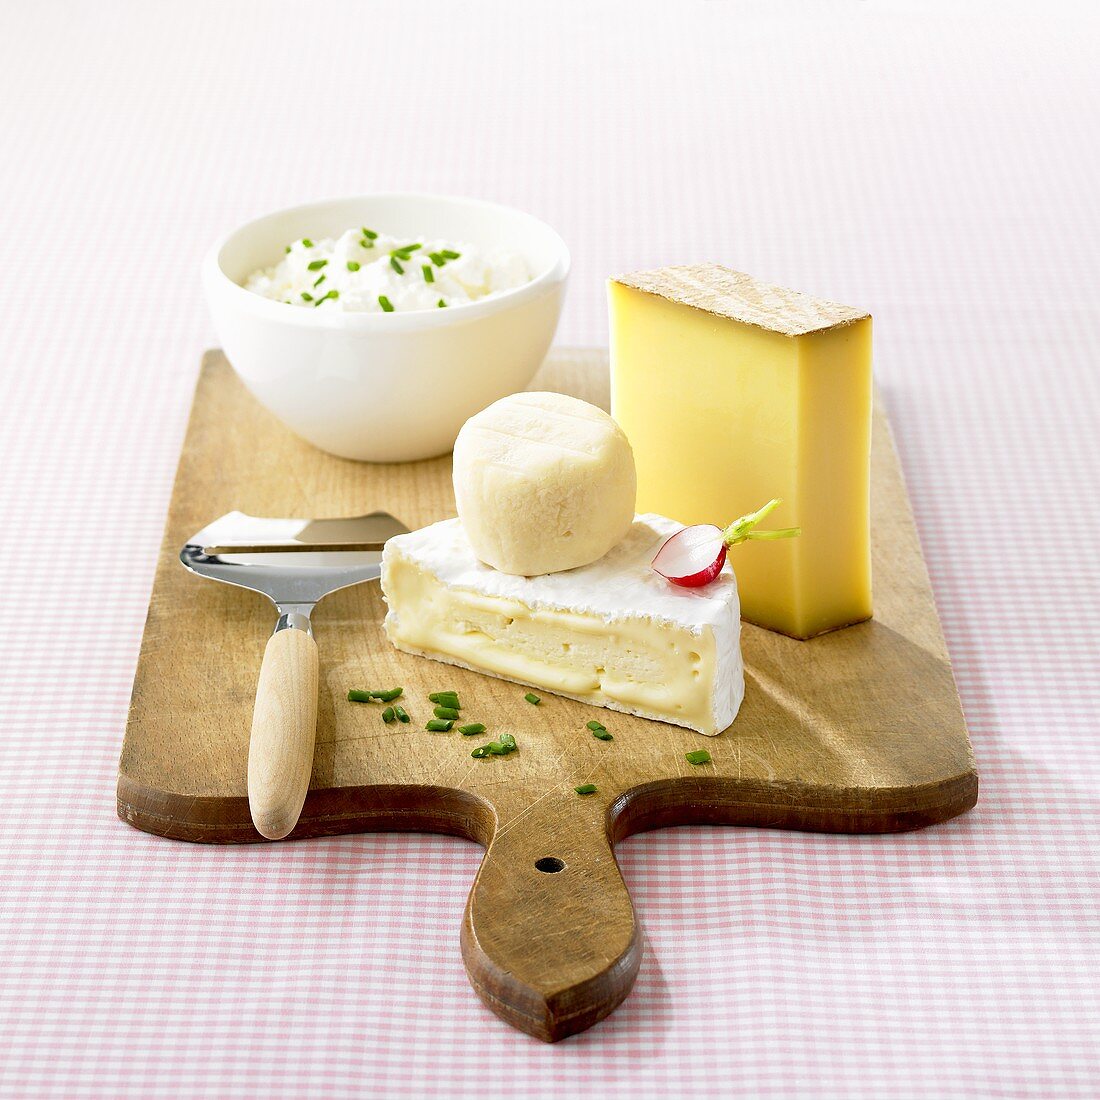 Hard cheese, soft cheese & fresh cheese on a wooden board